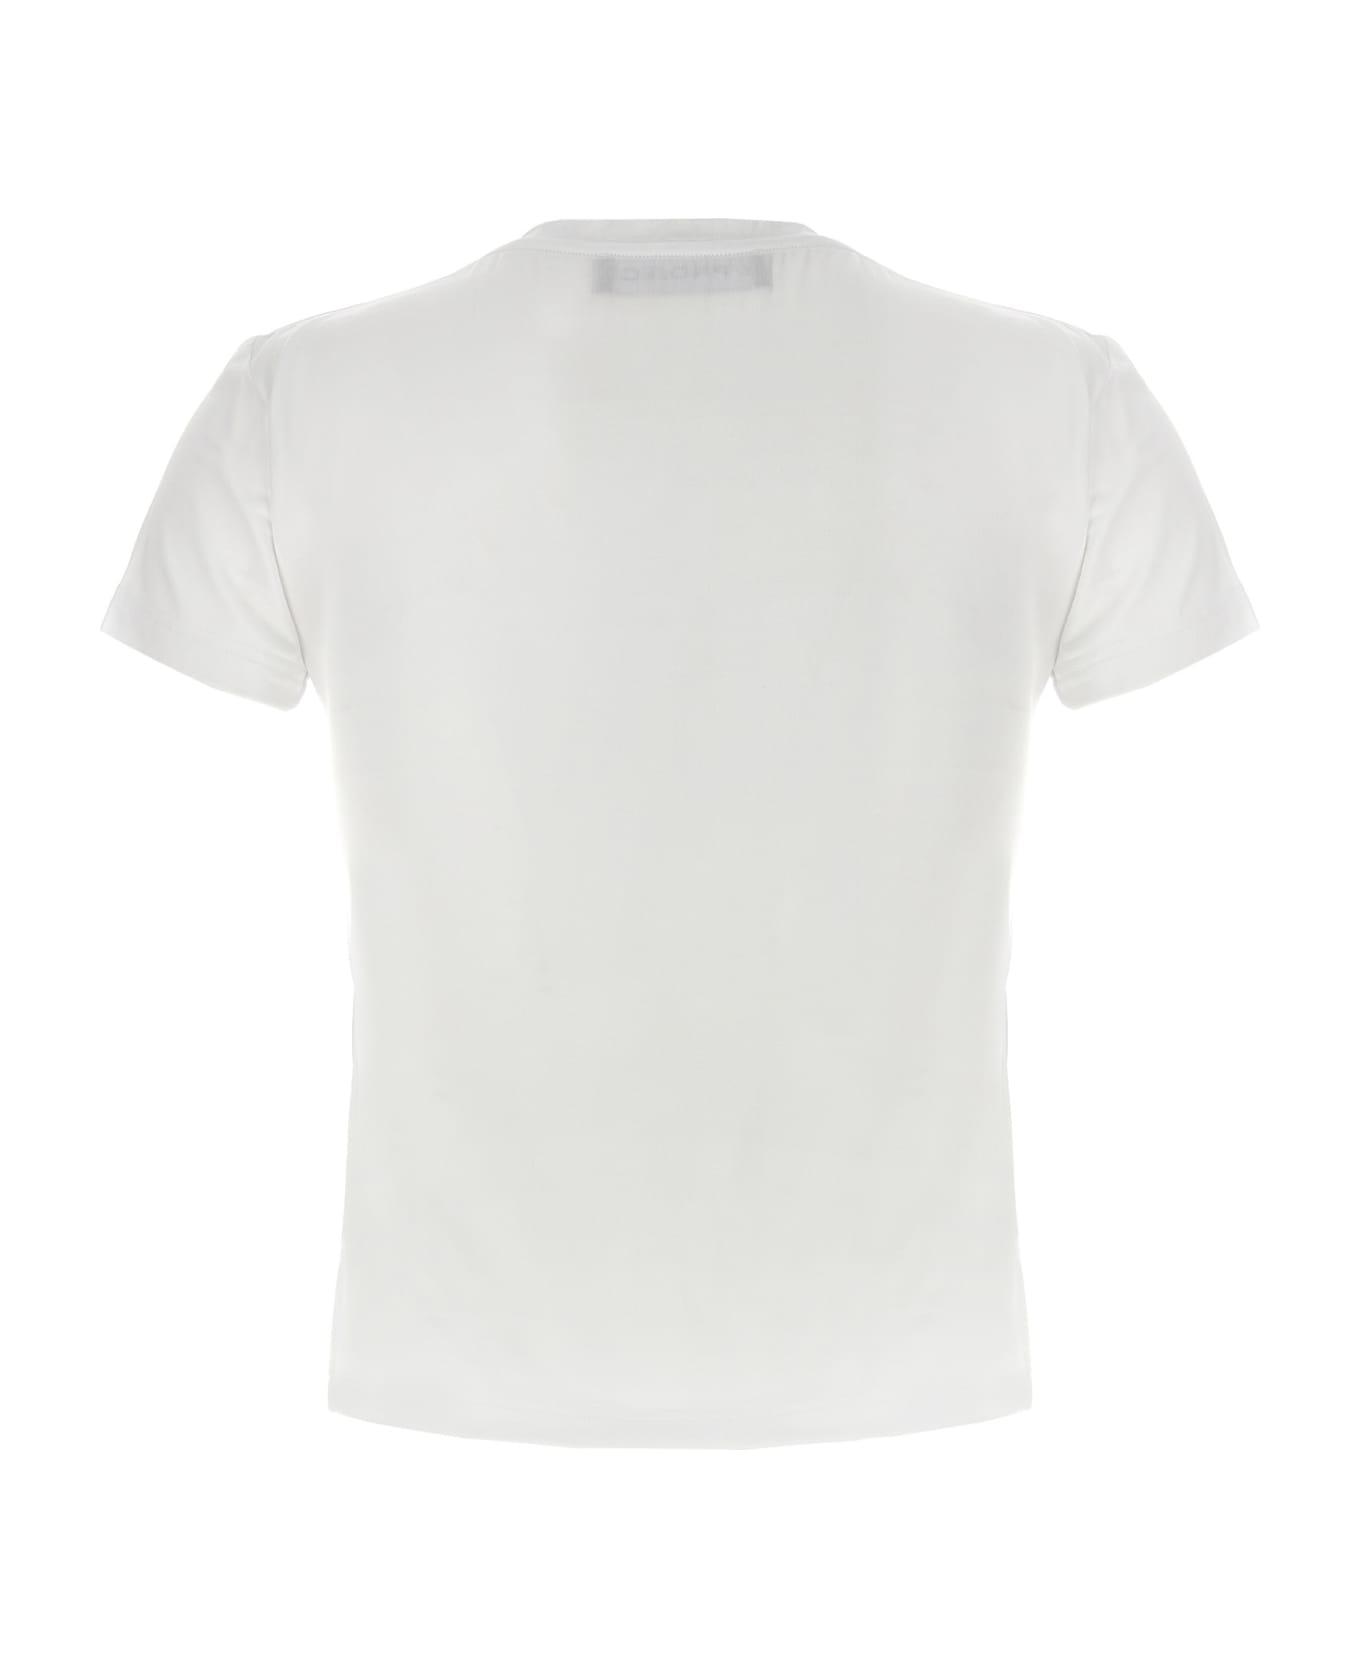 Y/Project 'y Baby Tee' T-shirt - White